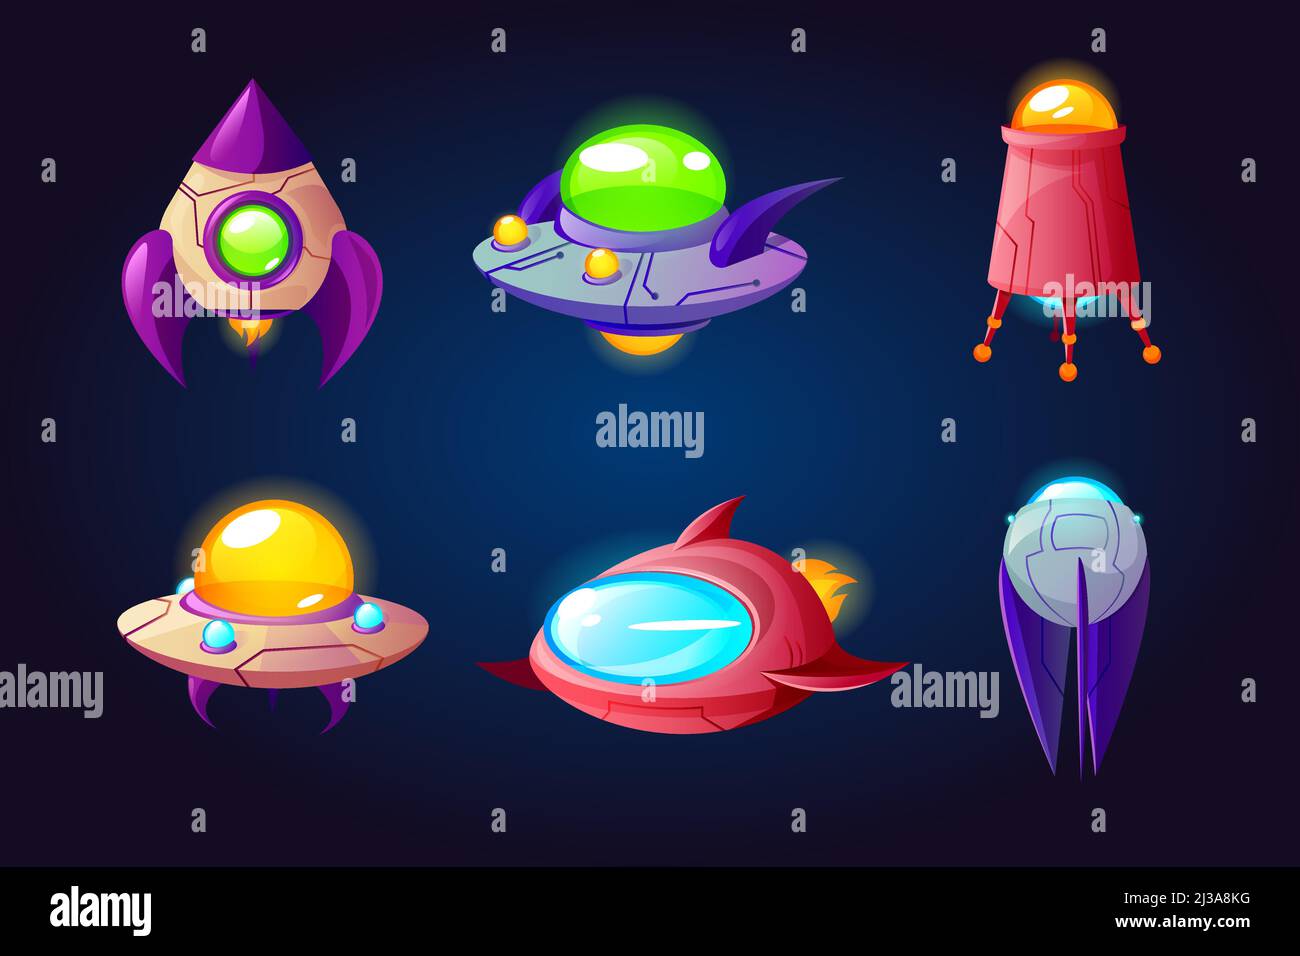 Alien space ships, ufo rockets, fantasy bizarre shuttles, computer game graphic design elements, cosmic collection of funny spaceships isolated on blu Stock Vector